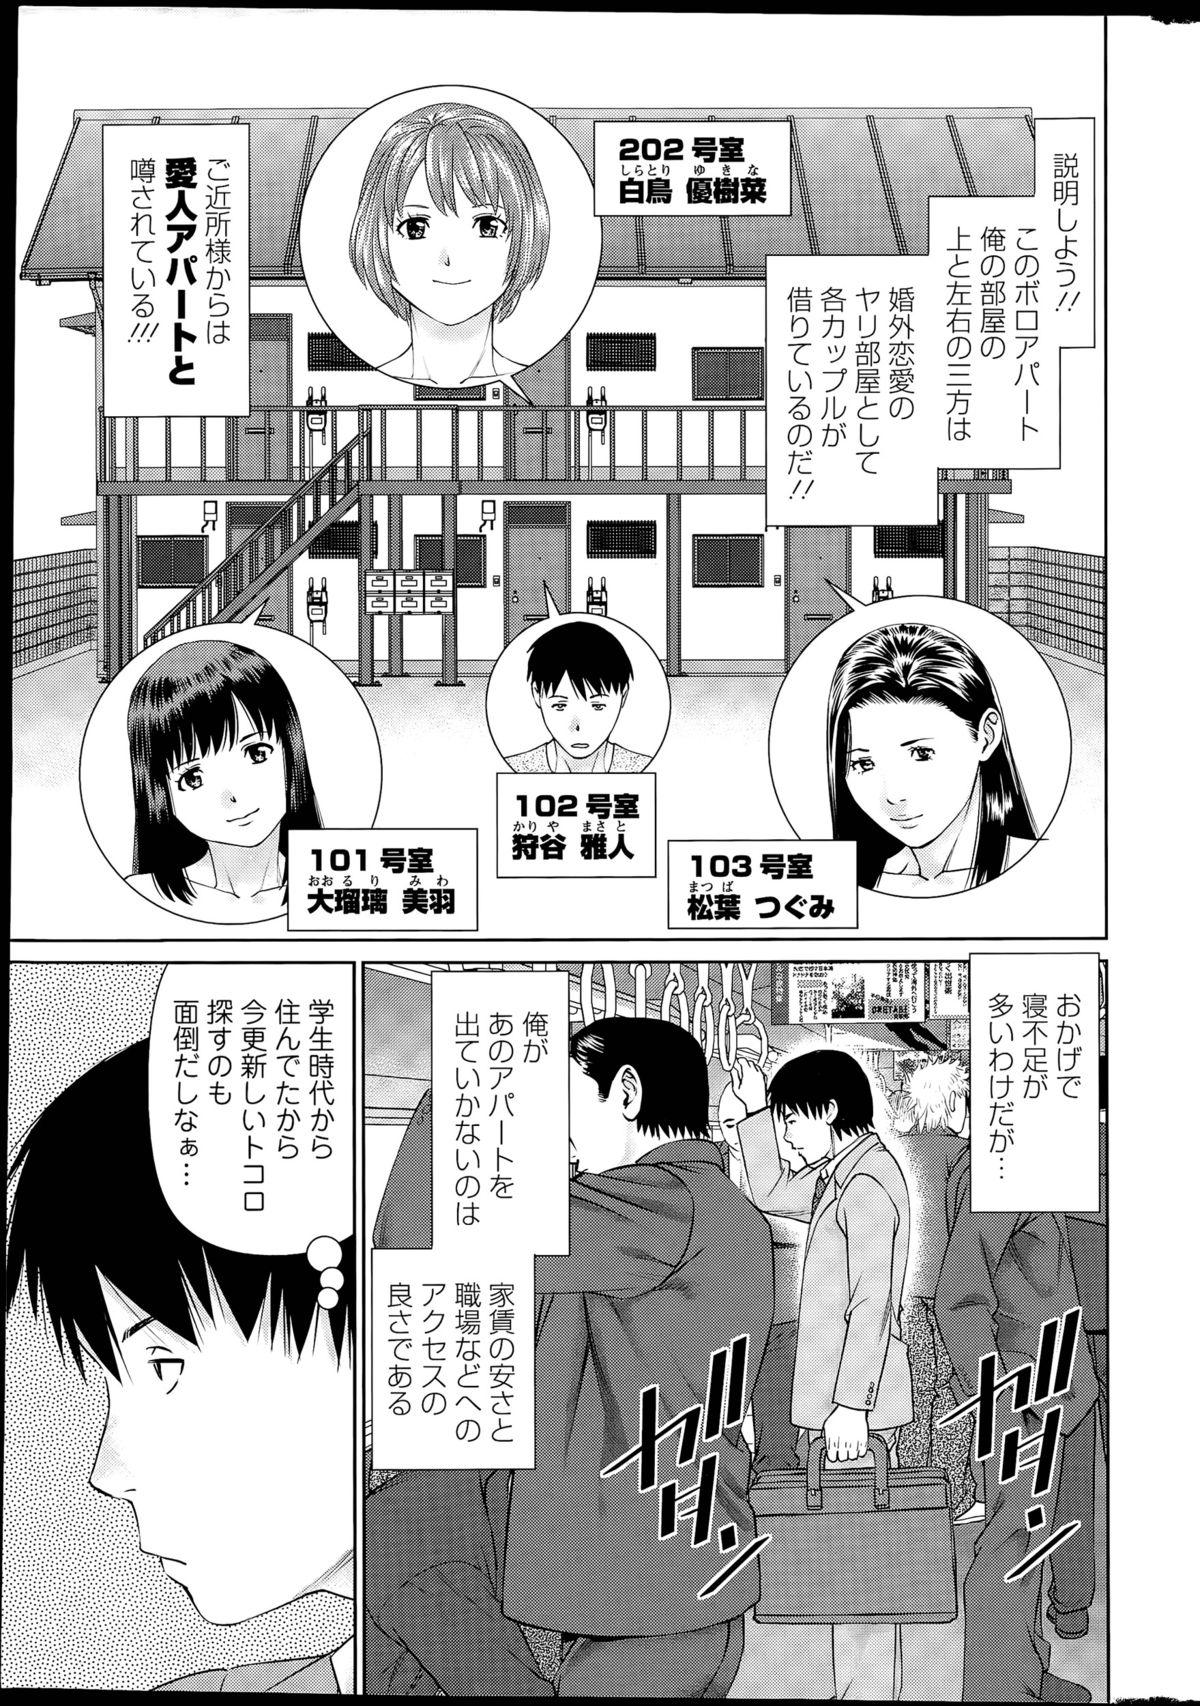 Stepfamily [Usi] Aijin Apart - Lover's Apartment Ch. 1-3 All Natural - Page 7